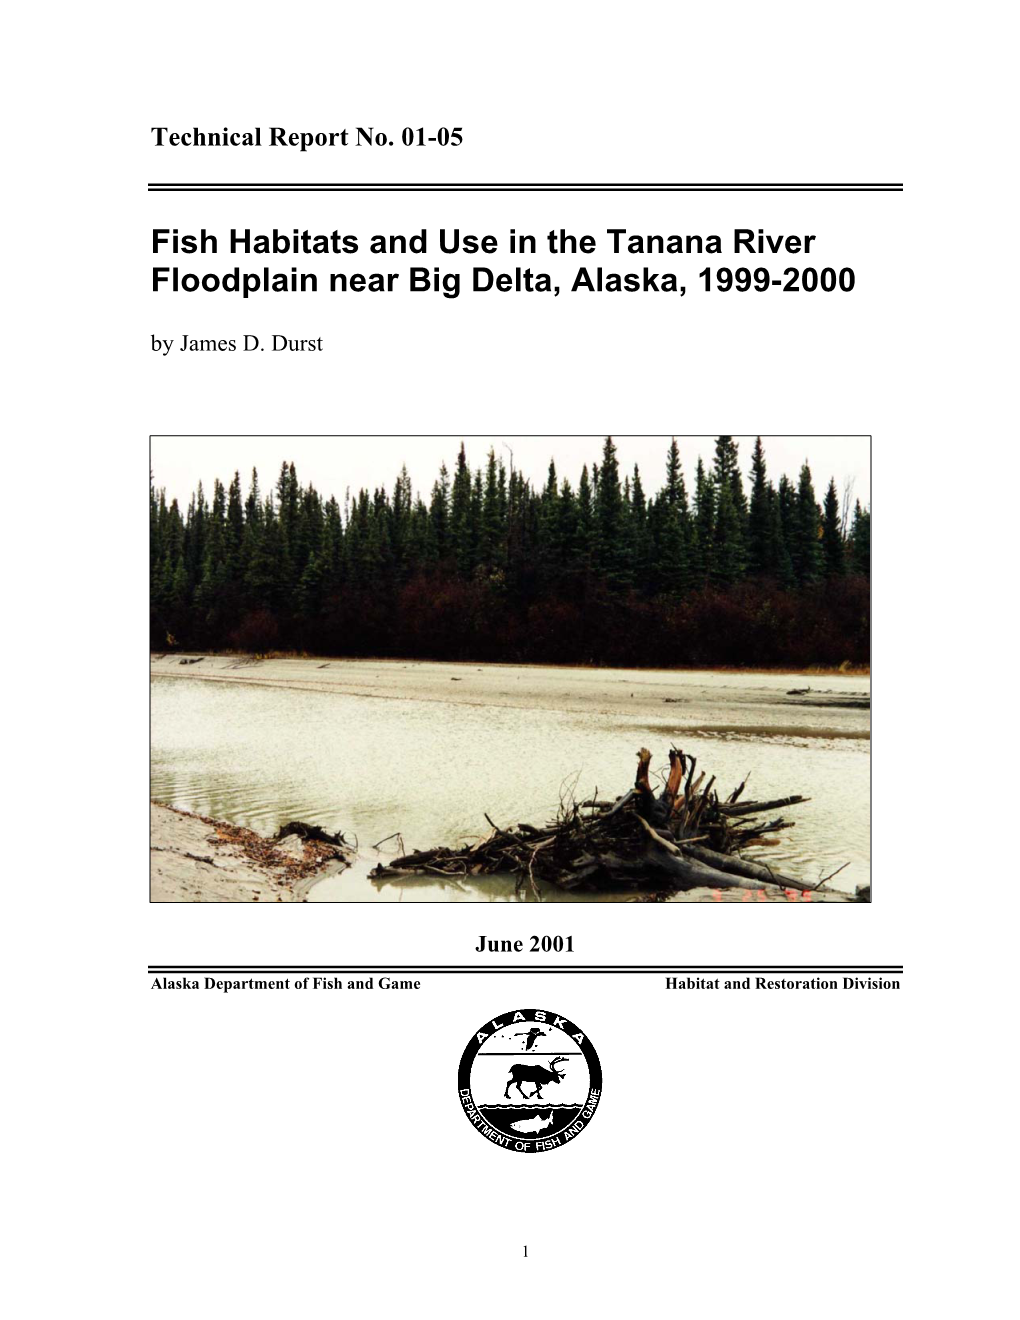 Technical Report 01-05: Fish Habitats and Use in the Tanana River